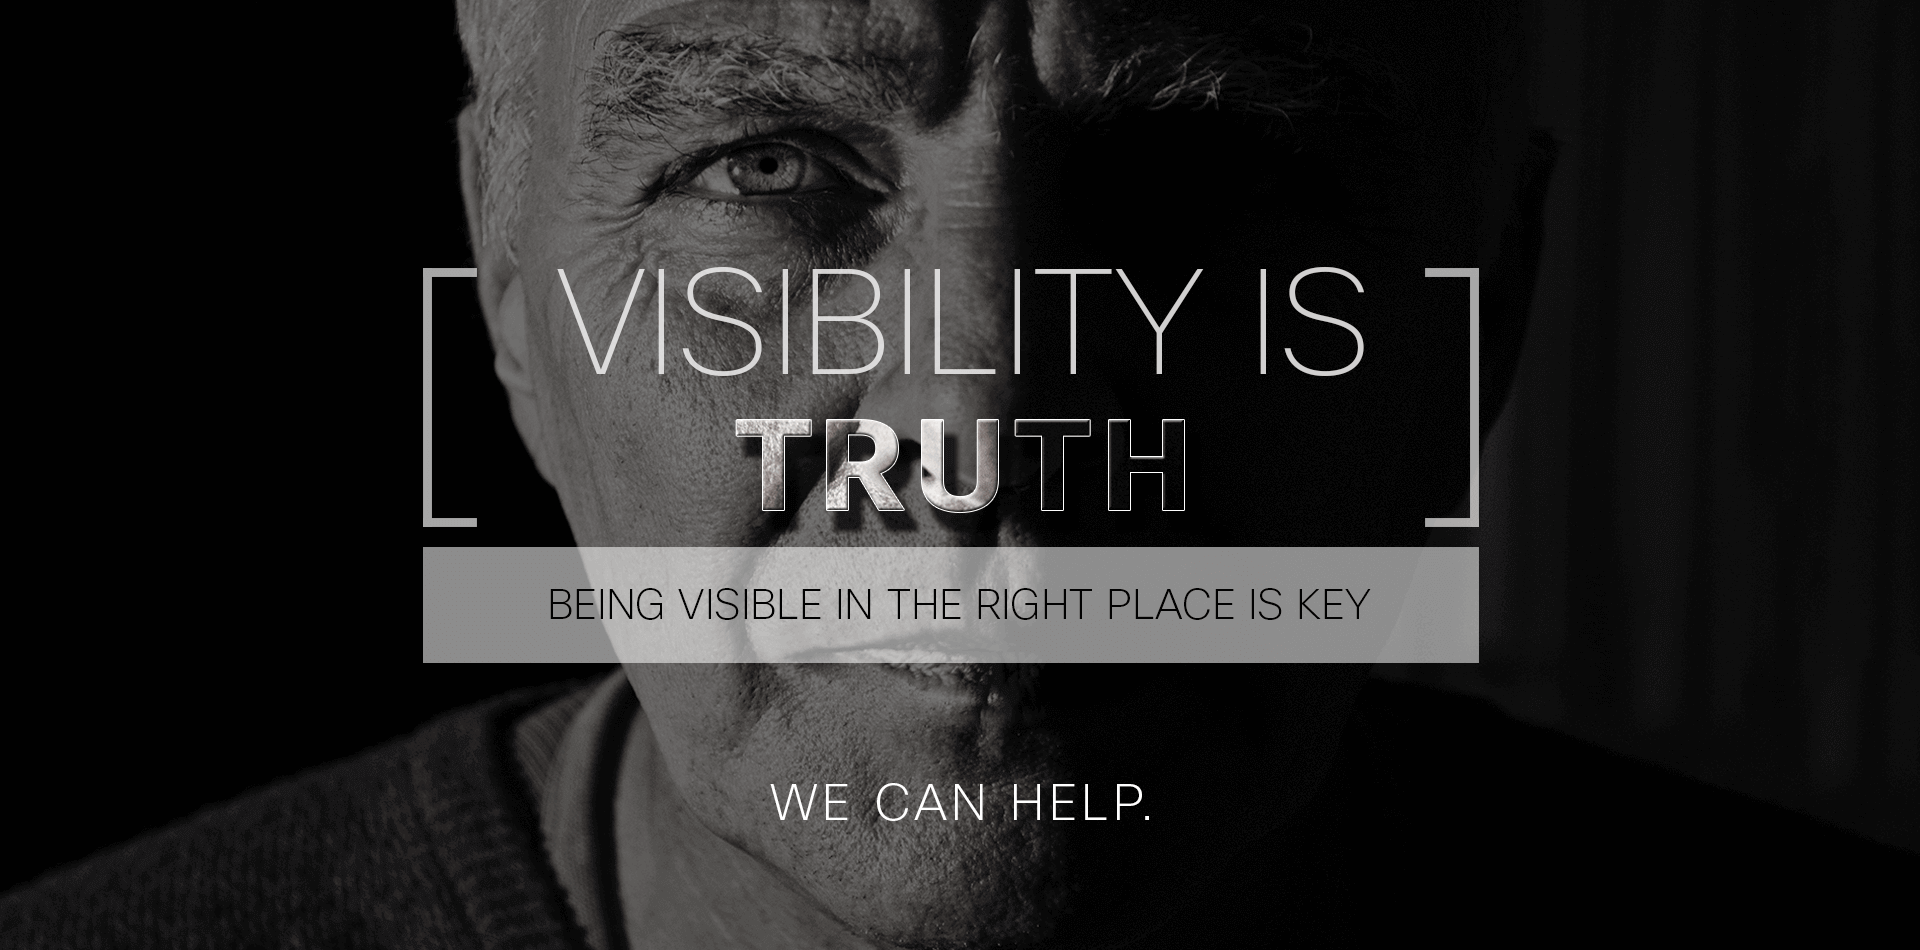 Visibility is truth.